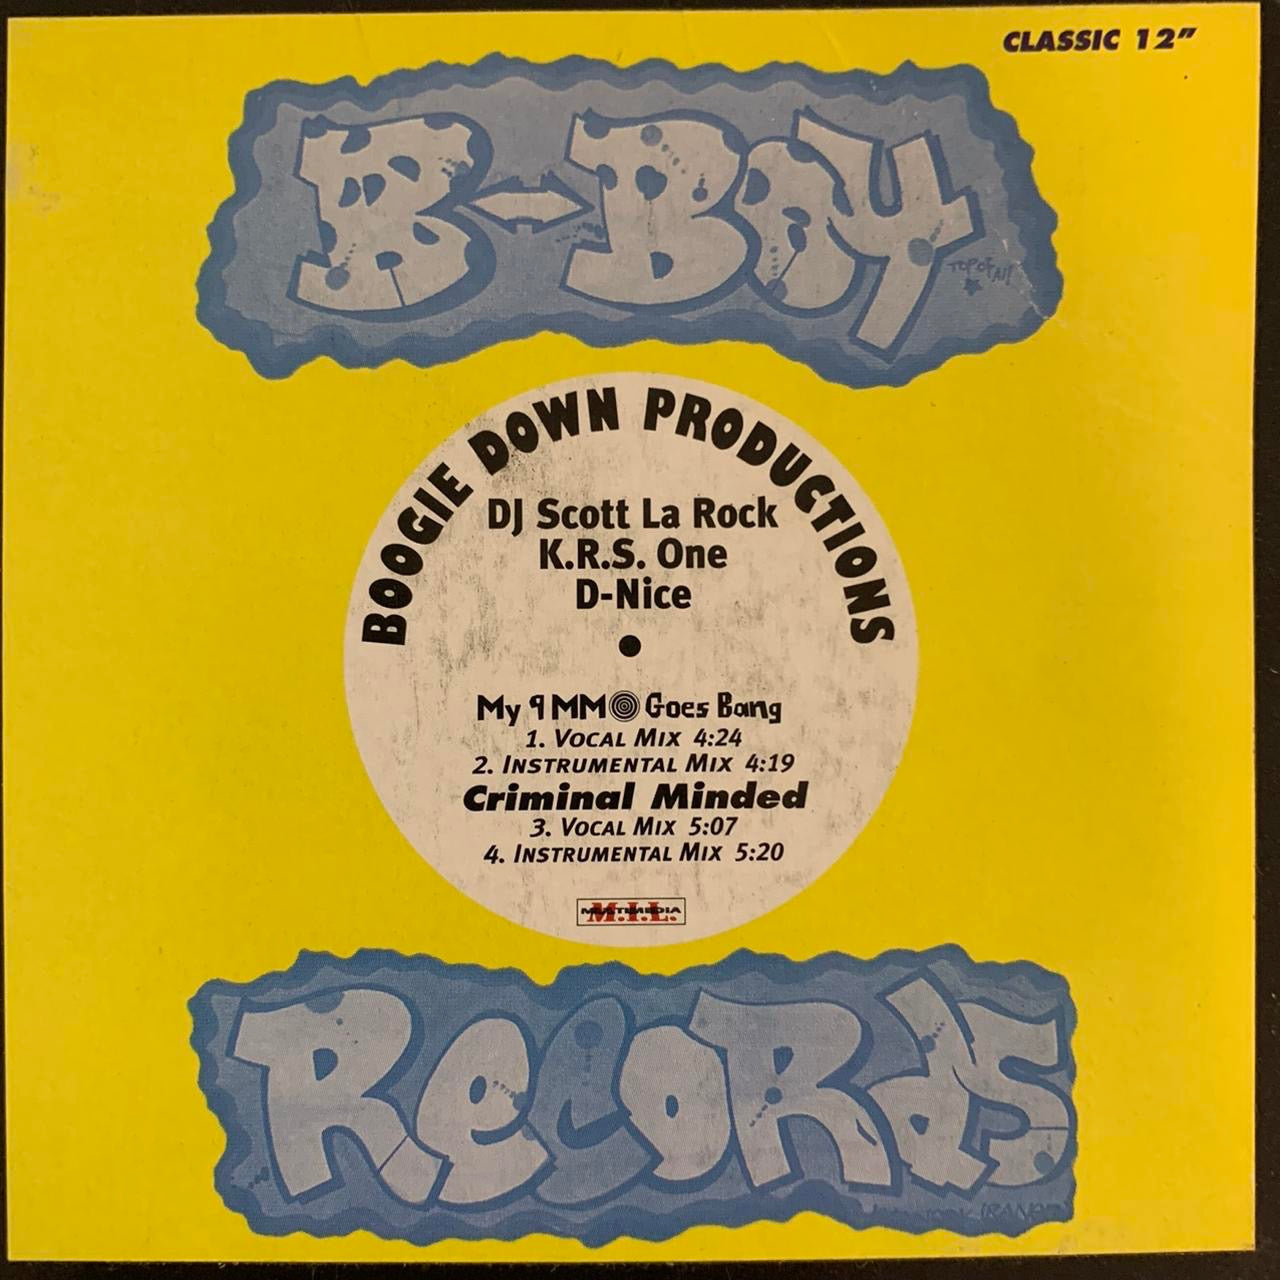 Boogie a Productions “My 9mm Goes Bang” / “Criminal Minded” 4 Version 12inch Vinyl